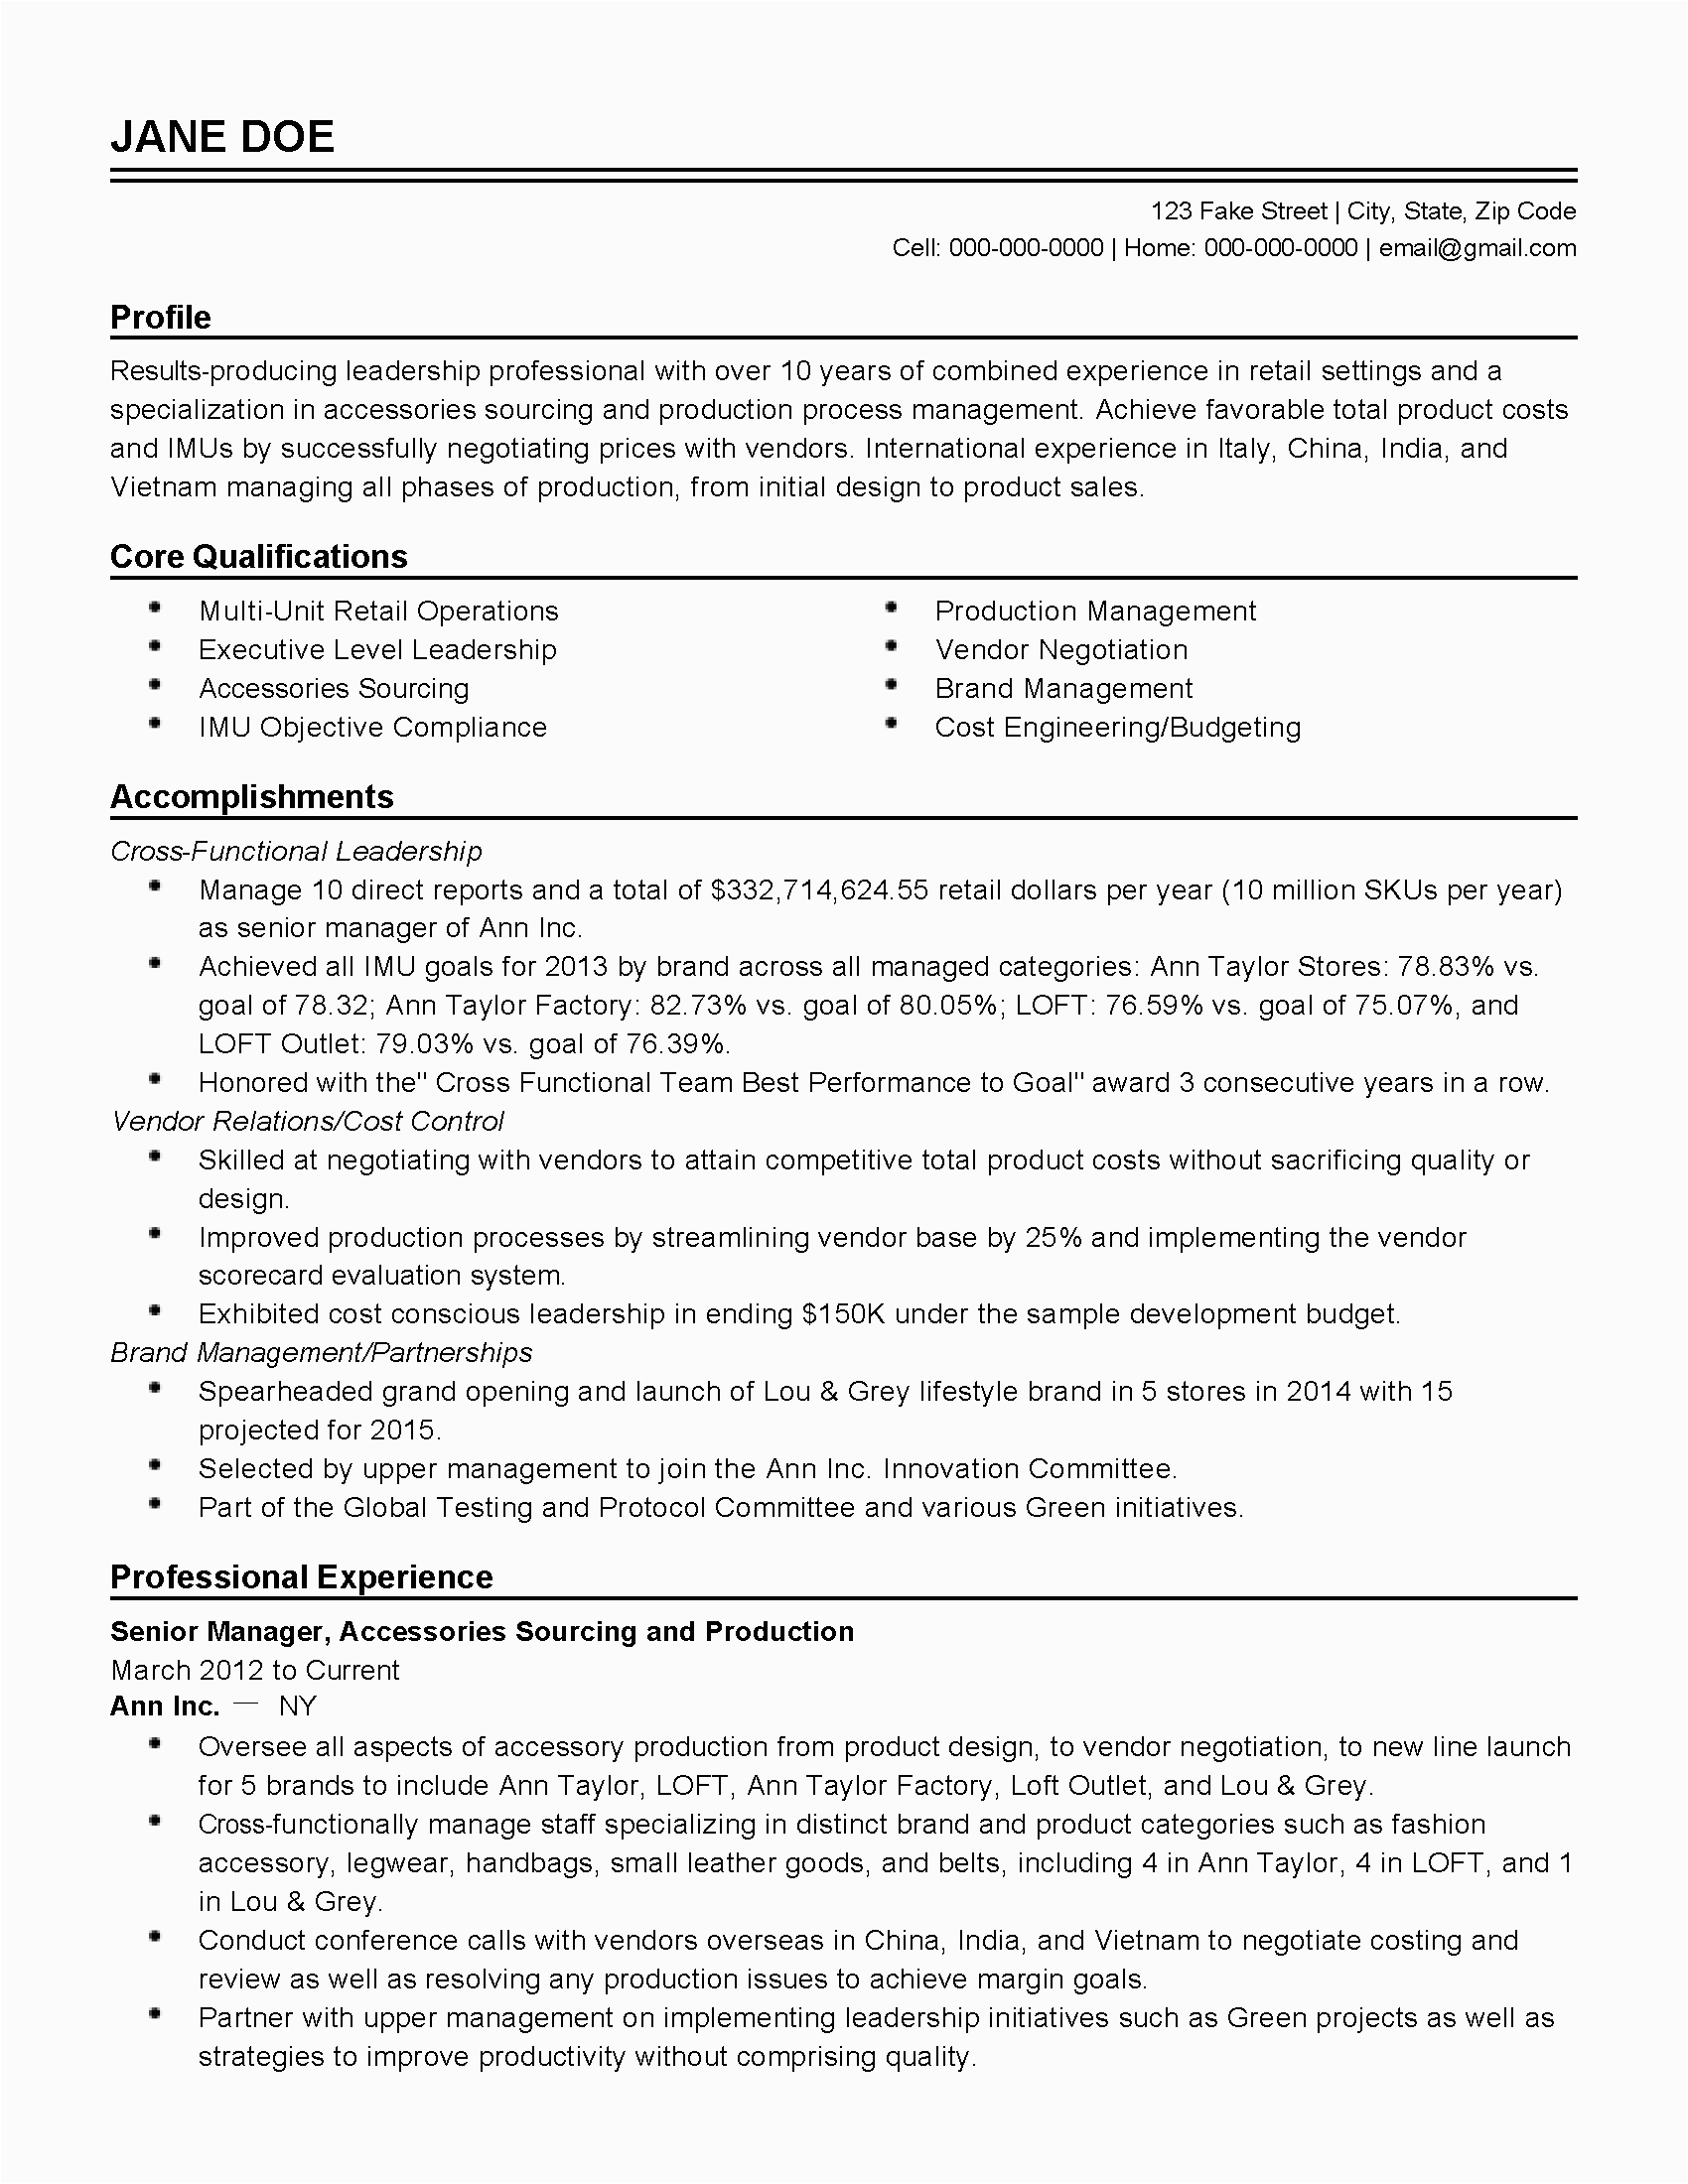 Sample Resume for 10 Years Experience Resume format 10 Years Experience Resume Templates